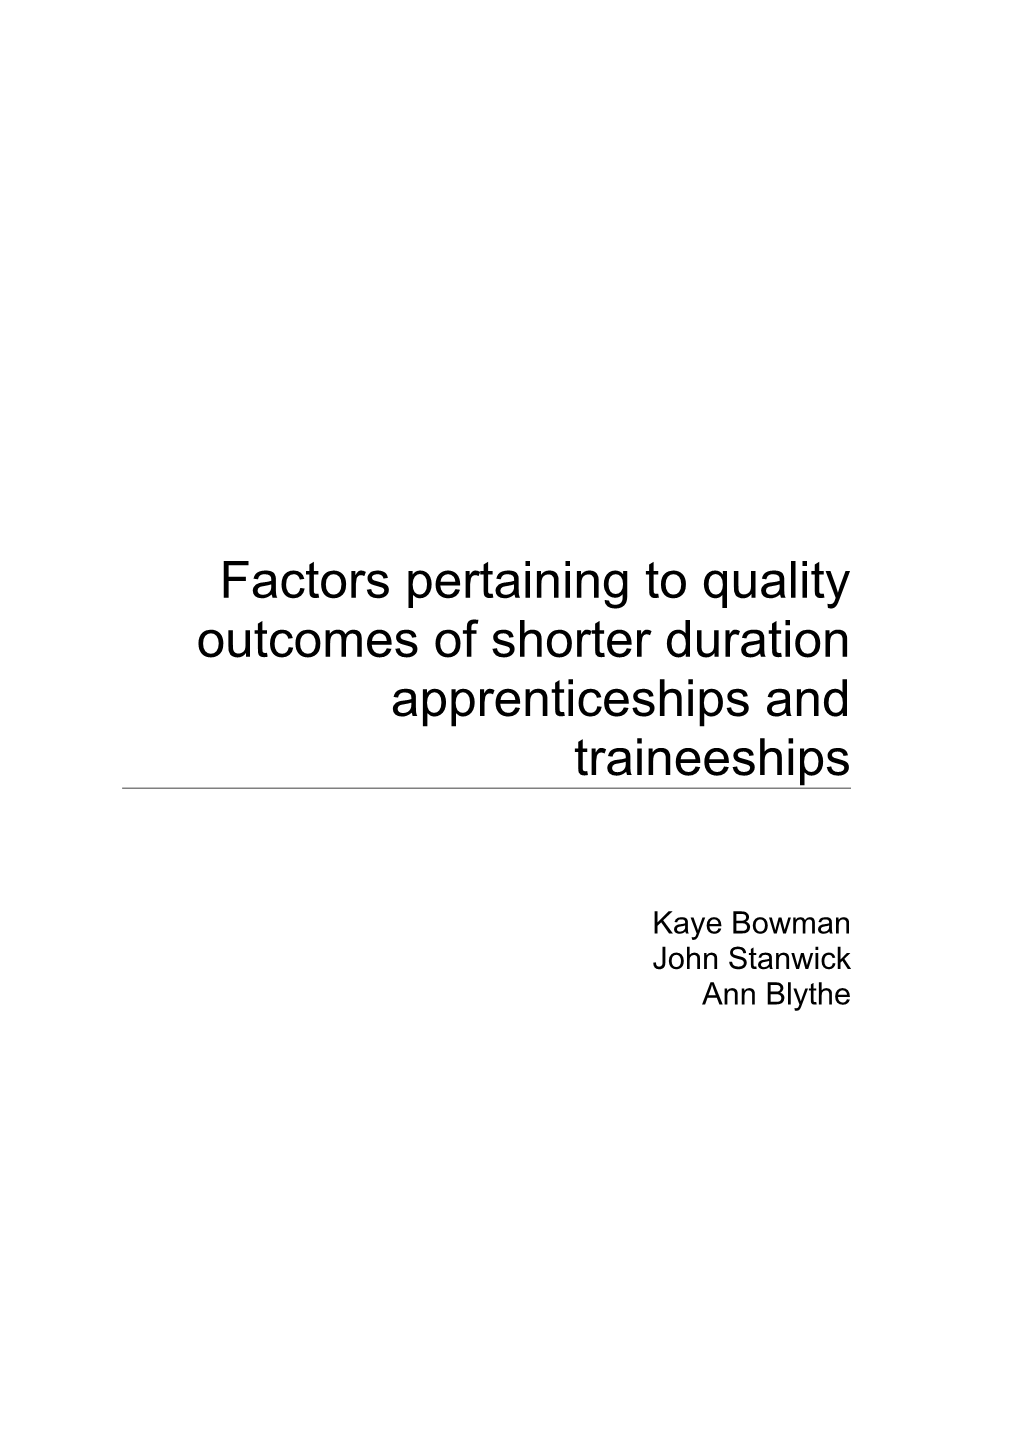 Factors Pertaining to Quality Outcomes